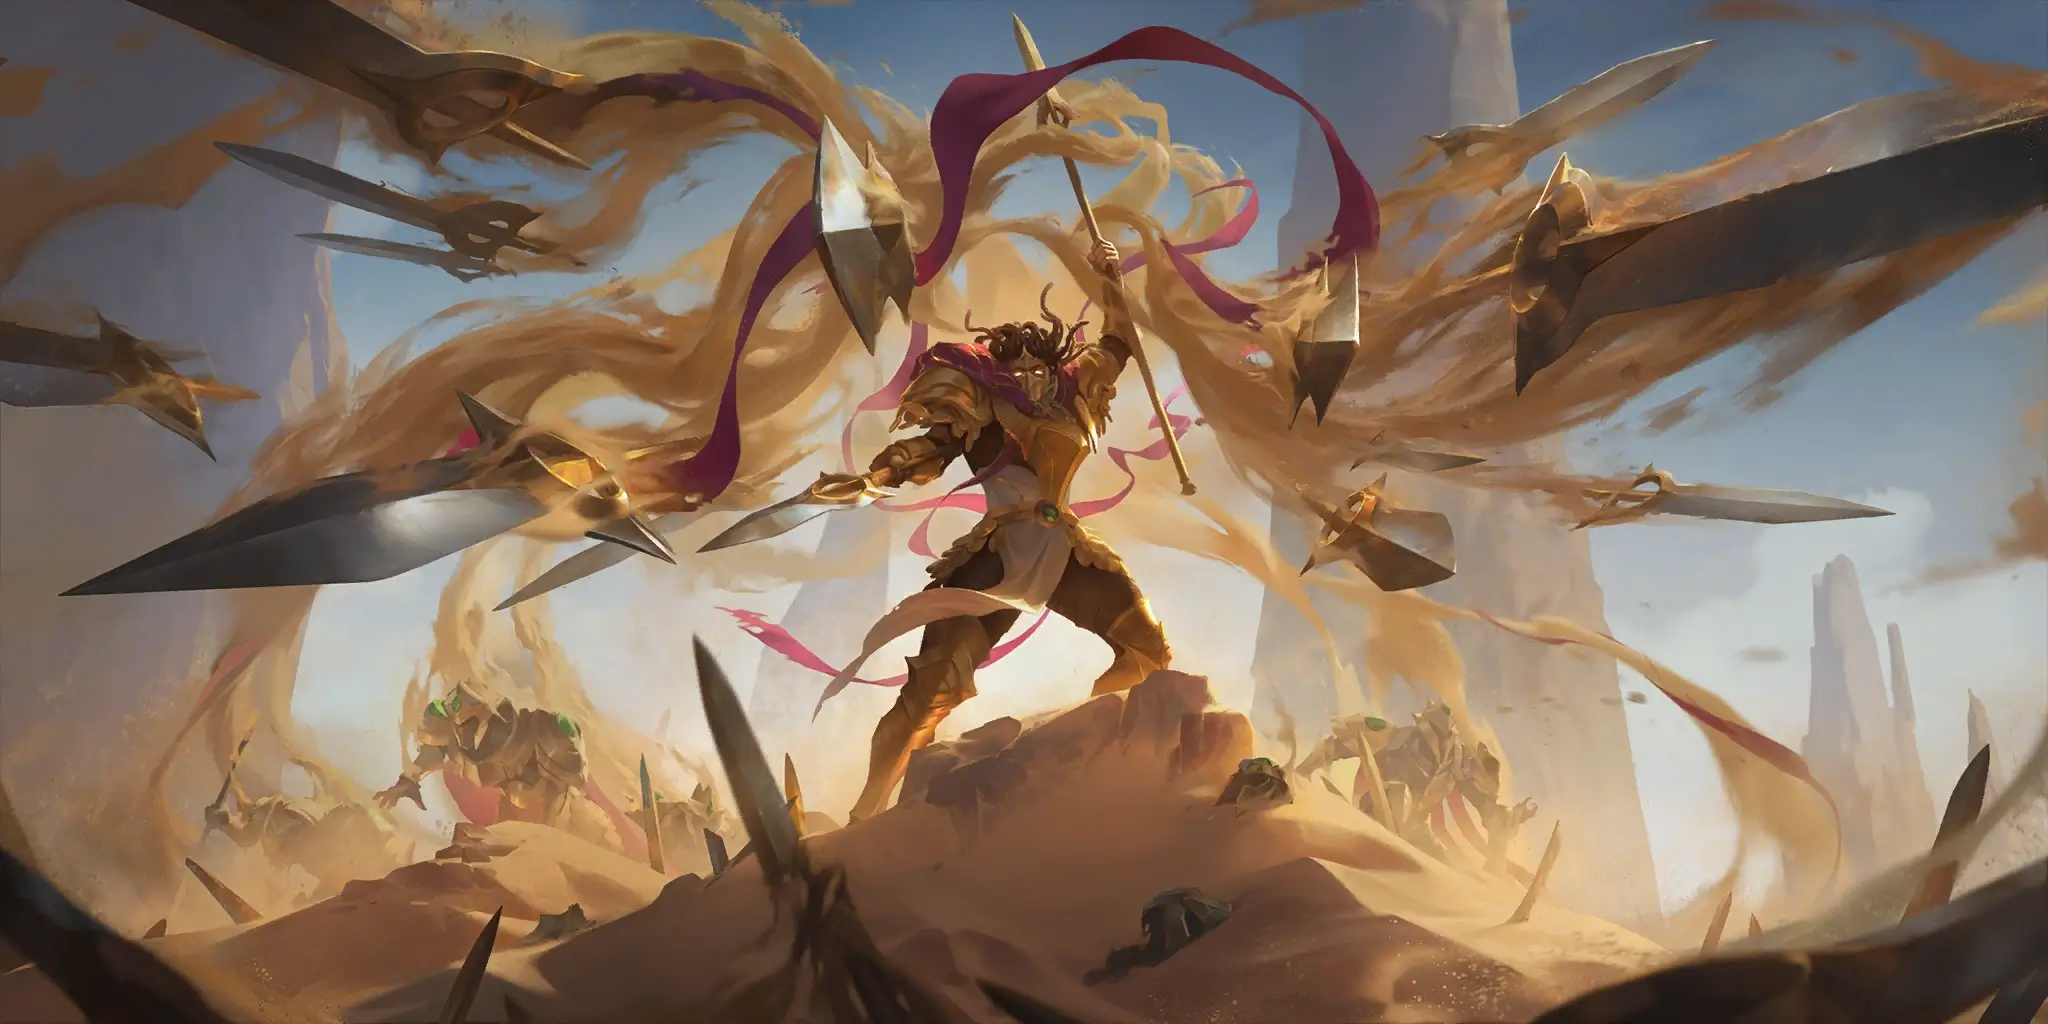 Fallen Sands General throwing dozens of blades while summoning a number of sand soldiers in Shurima